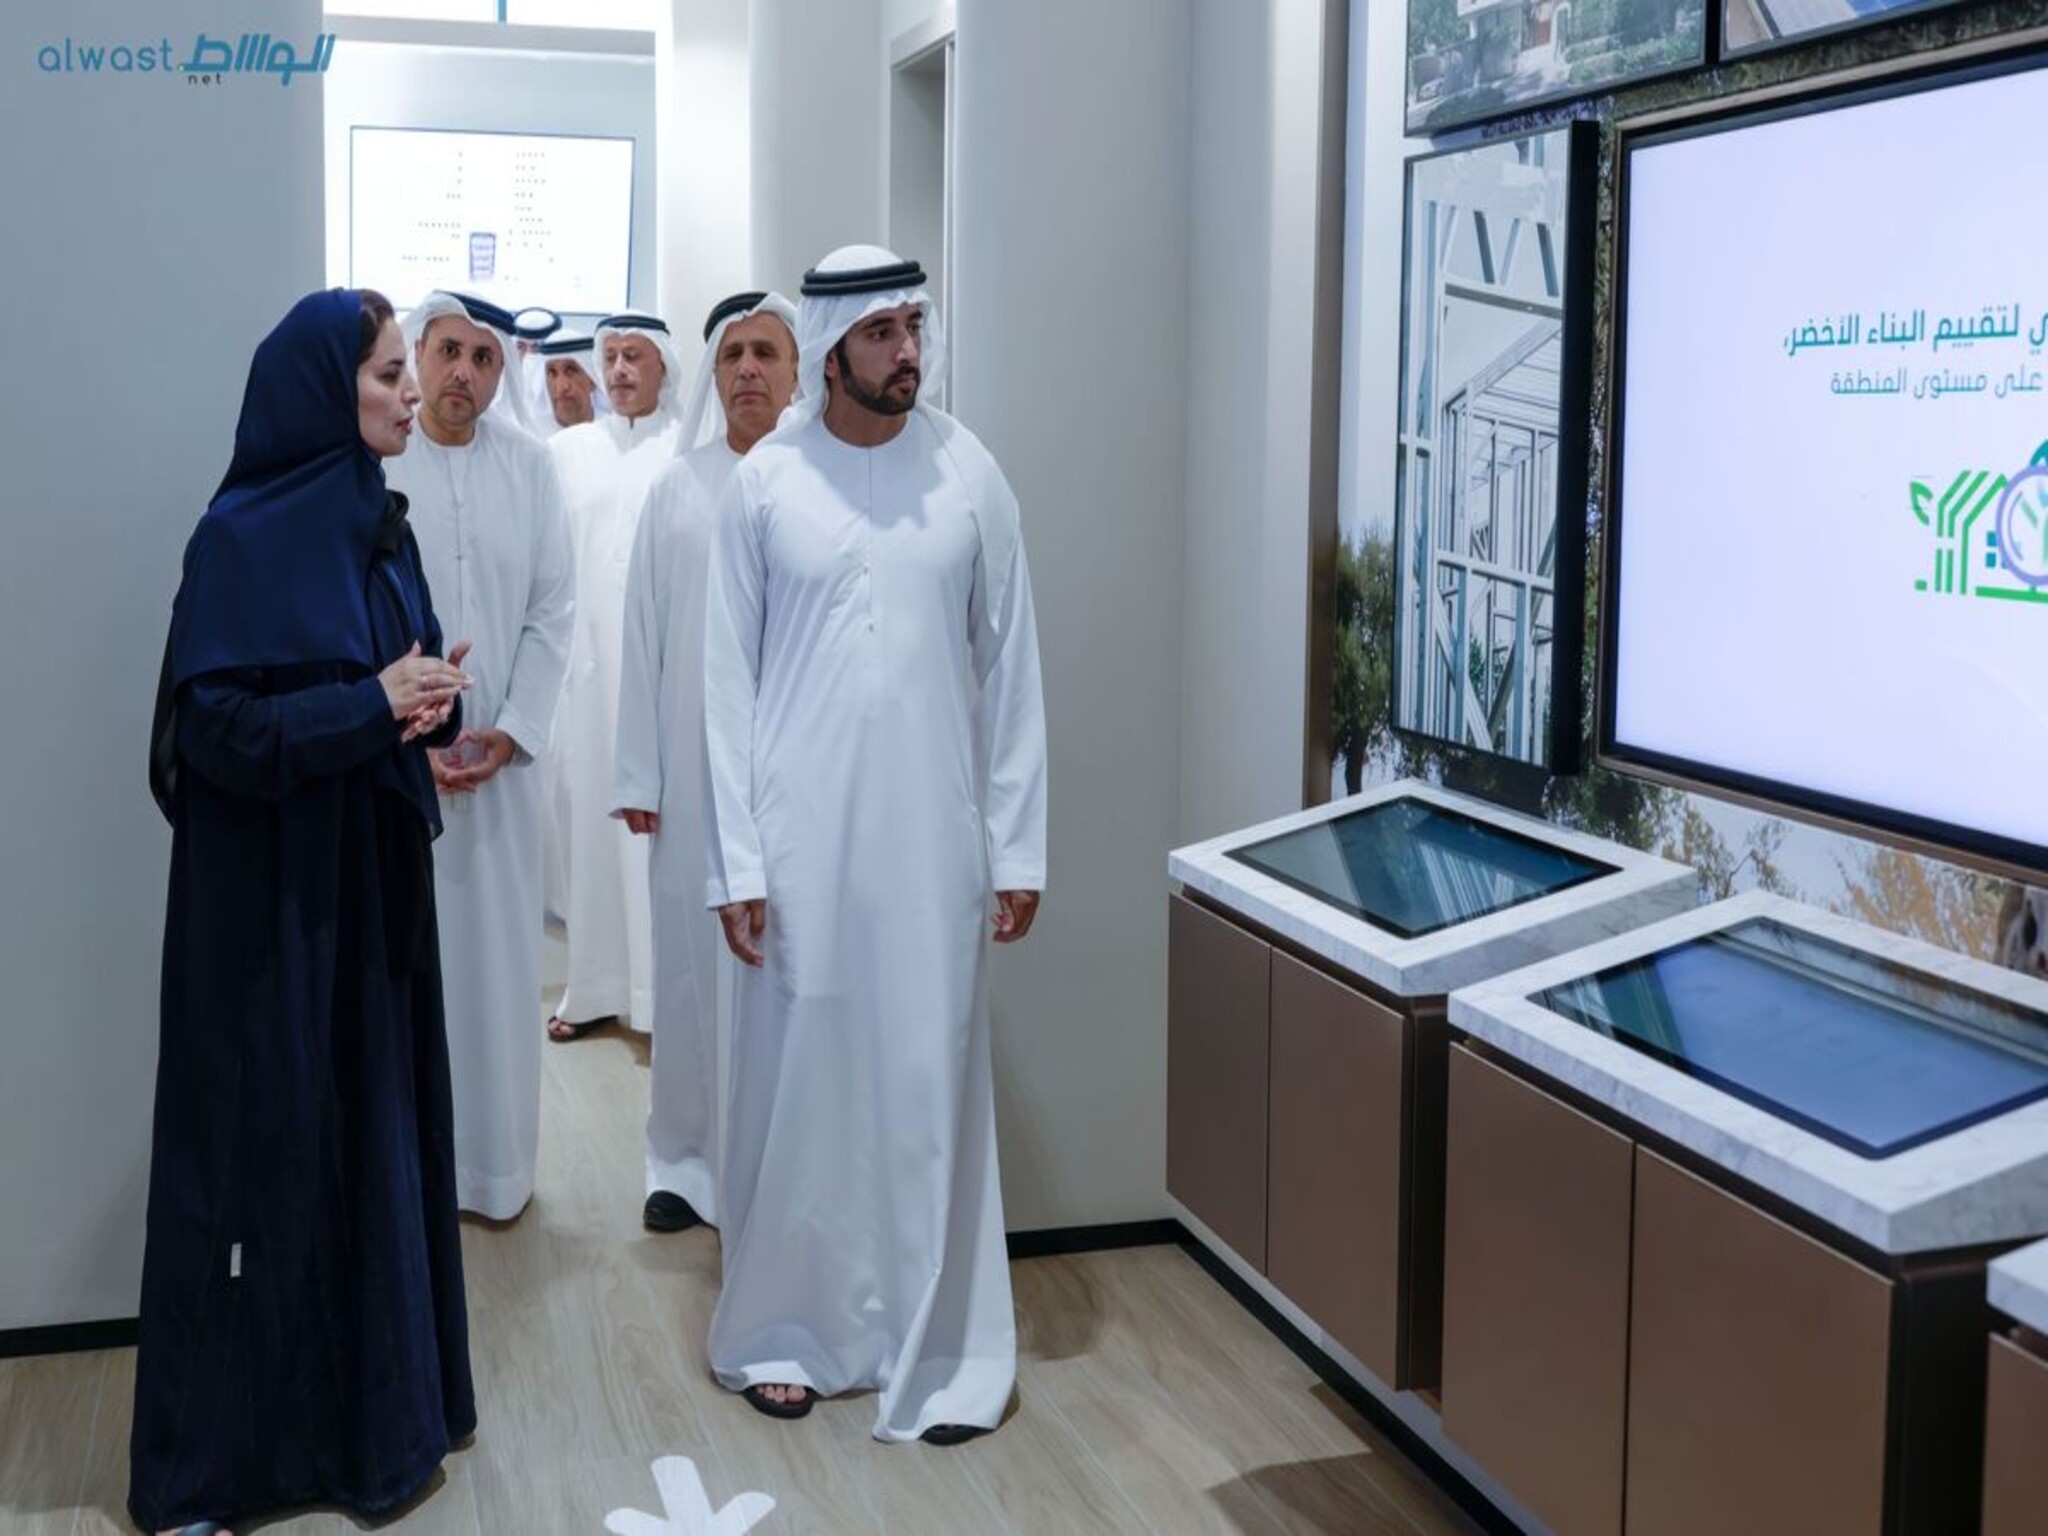 Sheikh Hamdan bin Mohammed launches New centre offering 54 services to citizens